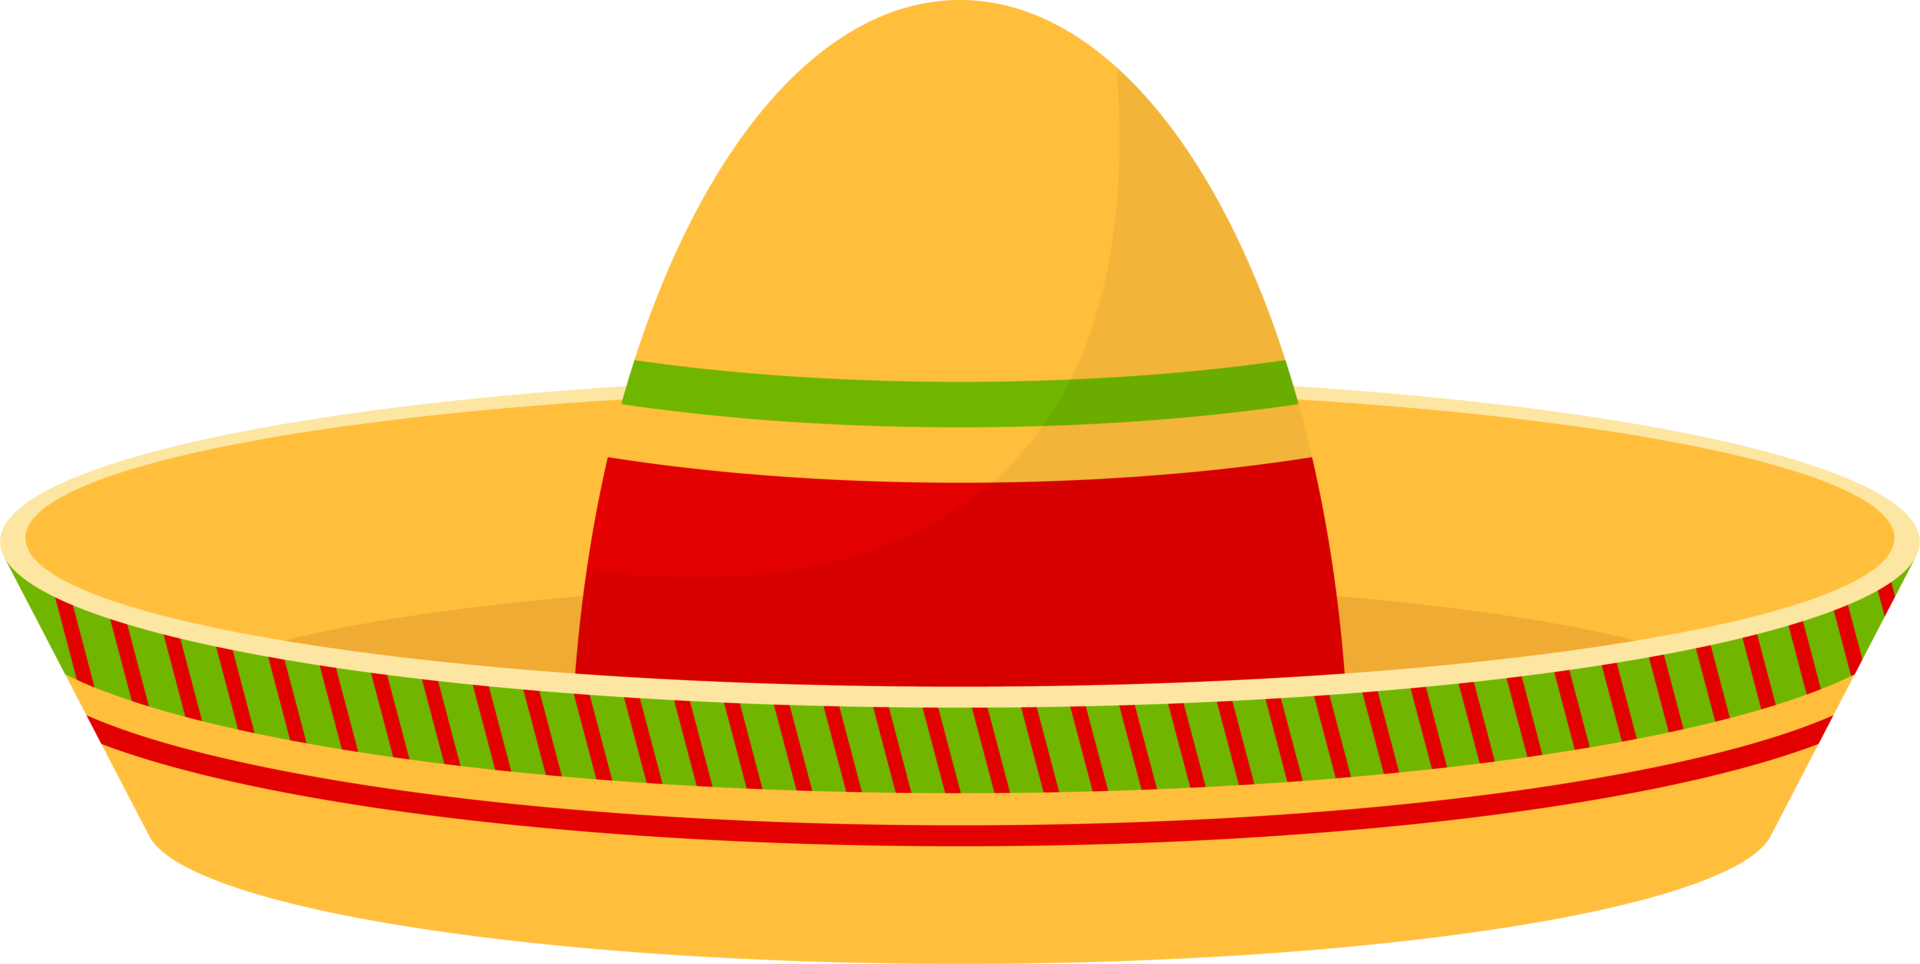 Mexican hat clipart design illustration png